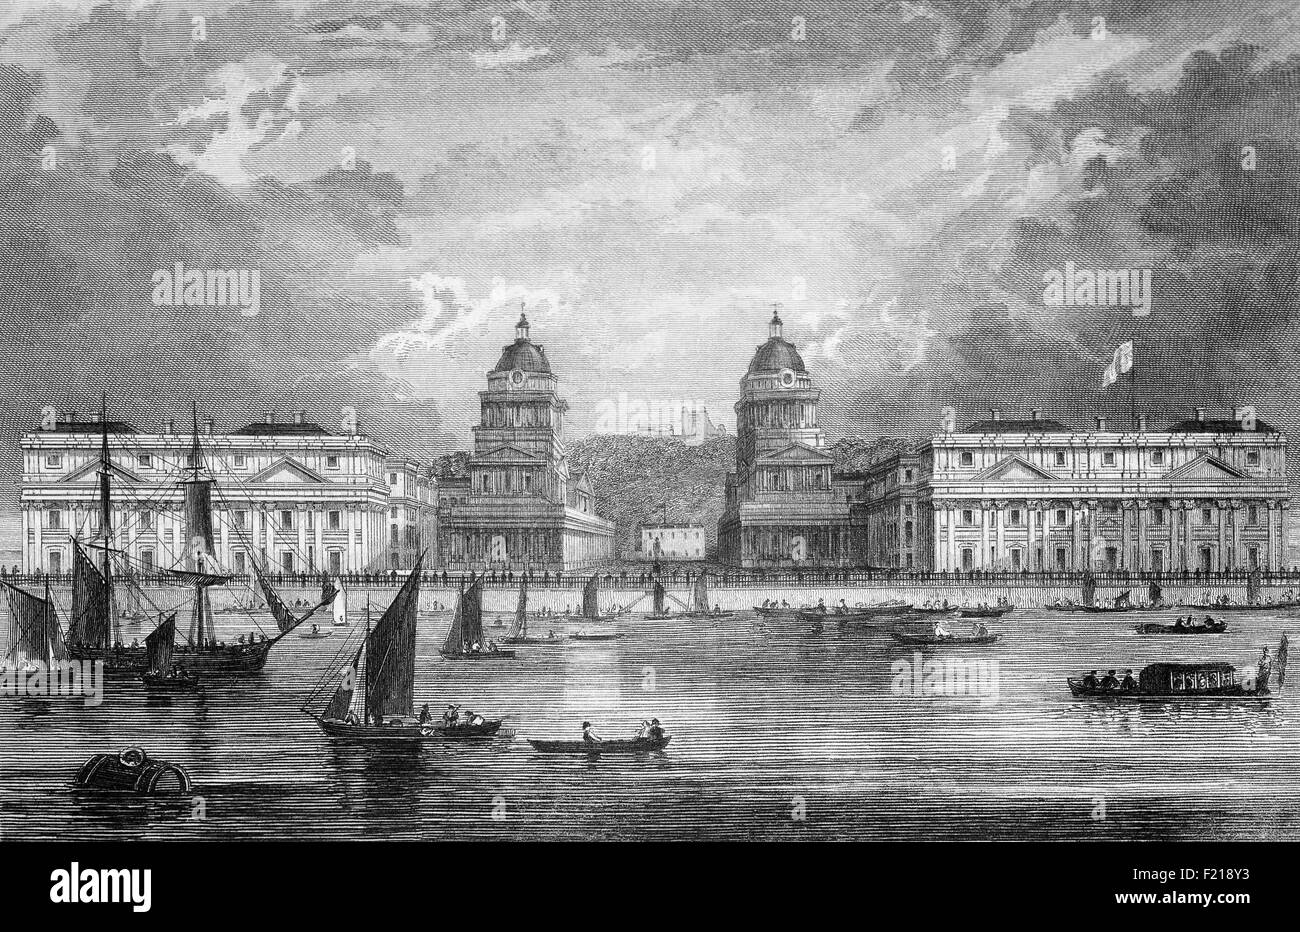 A 19th Century view of Greenwich Hospital, London, England founded in 1694 on the south bank of the river Thames on the instructions of Queen Mary II, after seeing  wounded sailors returning from the Battle of La Hogue in 1692. It became a permanent home for retired sailors of the Royal Navy, from 1692 to 1869.  The word 'hospital' was used in its original sense of a place providing hospitality for those in need of it, and did not refer to medical care, although the buildings included an infirmary constructed in the 1760s where pensioners were attended by trained medical staff. Stock Photo